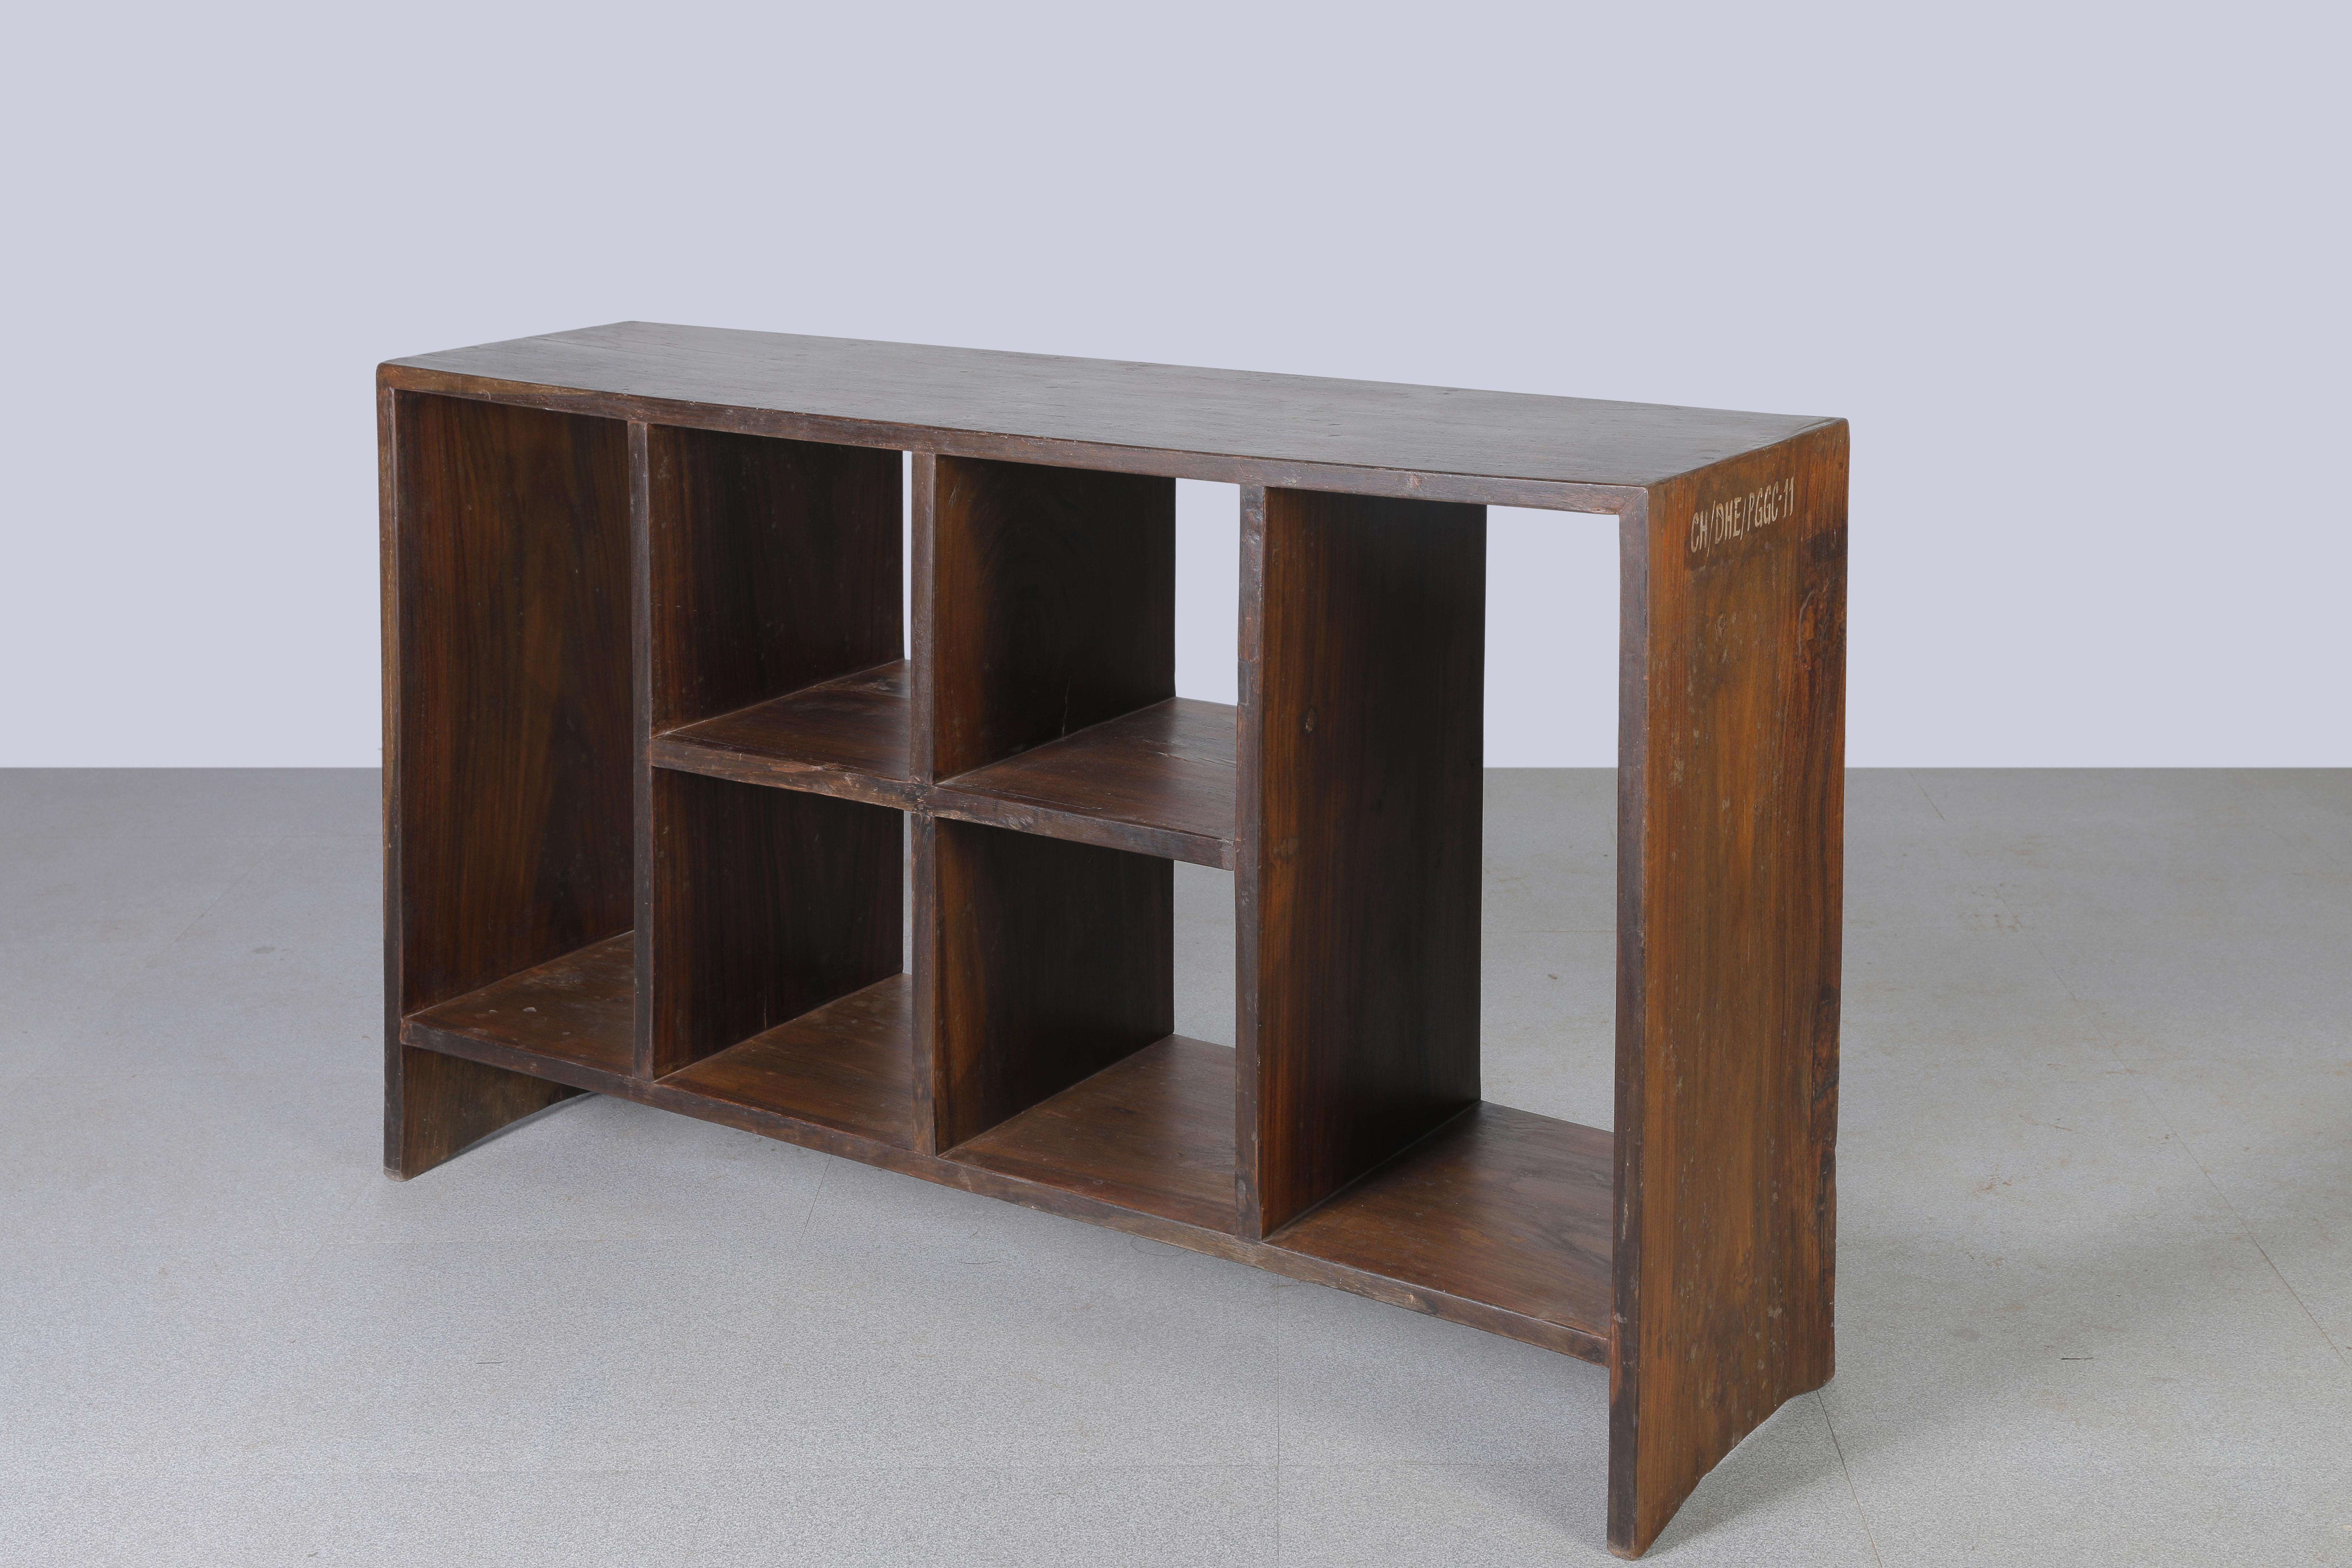 Indian Pierre Jeanneret PJ-R-27-A File Rack / Authentic Mid-Century Modern Chandigarh